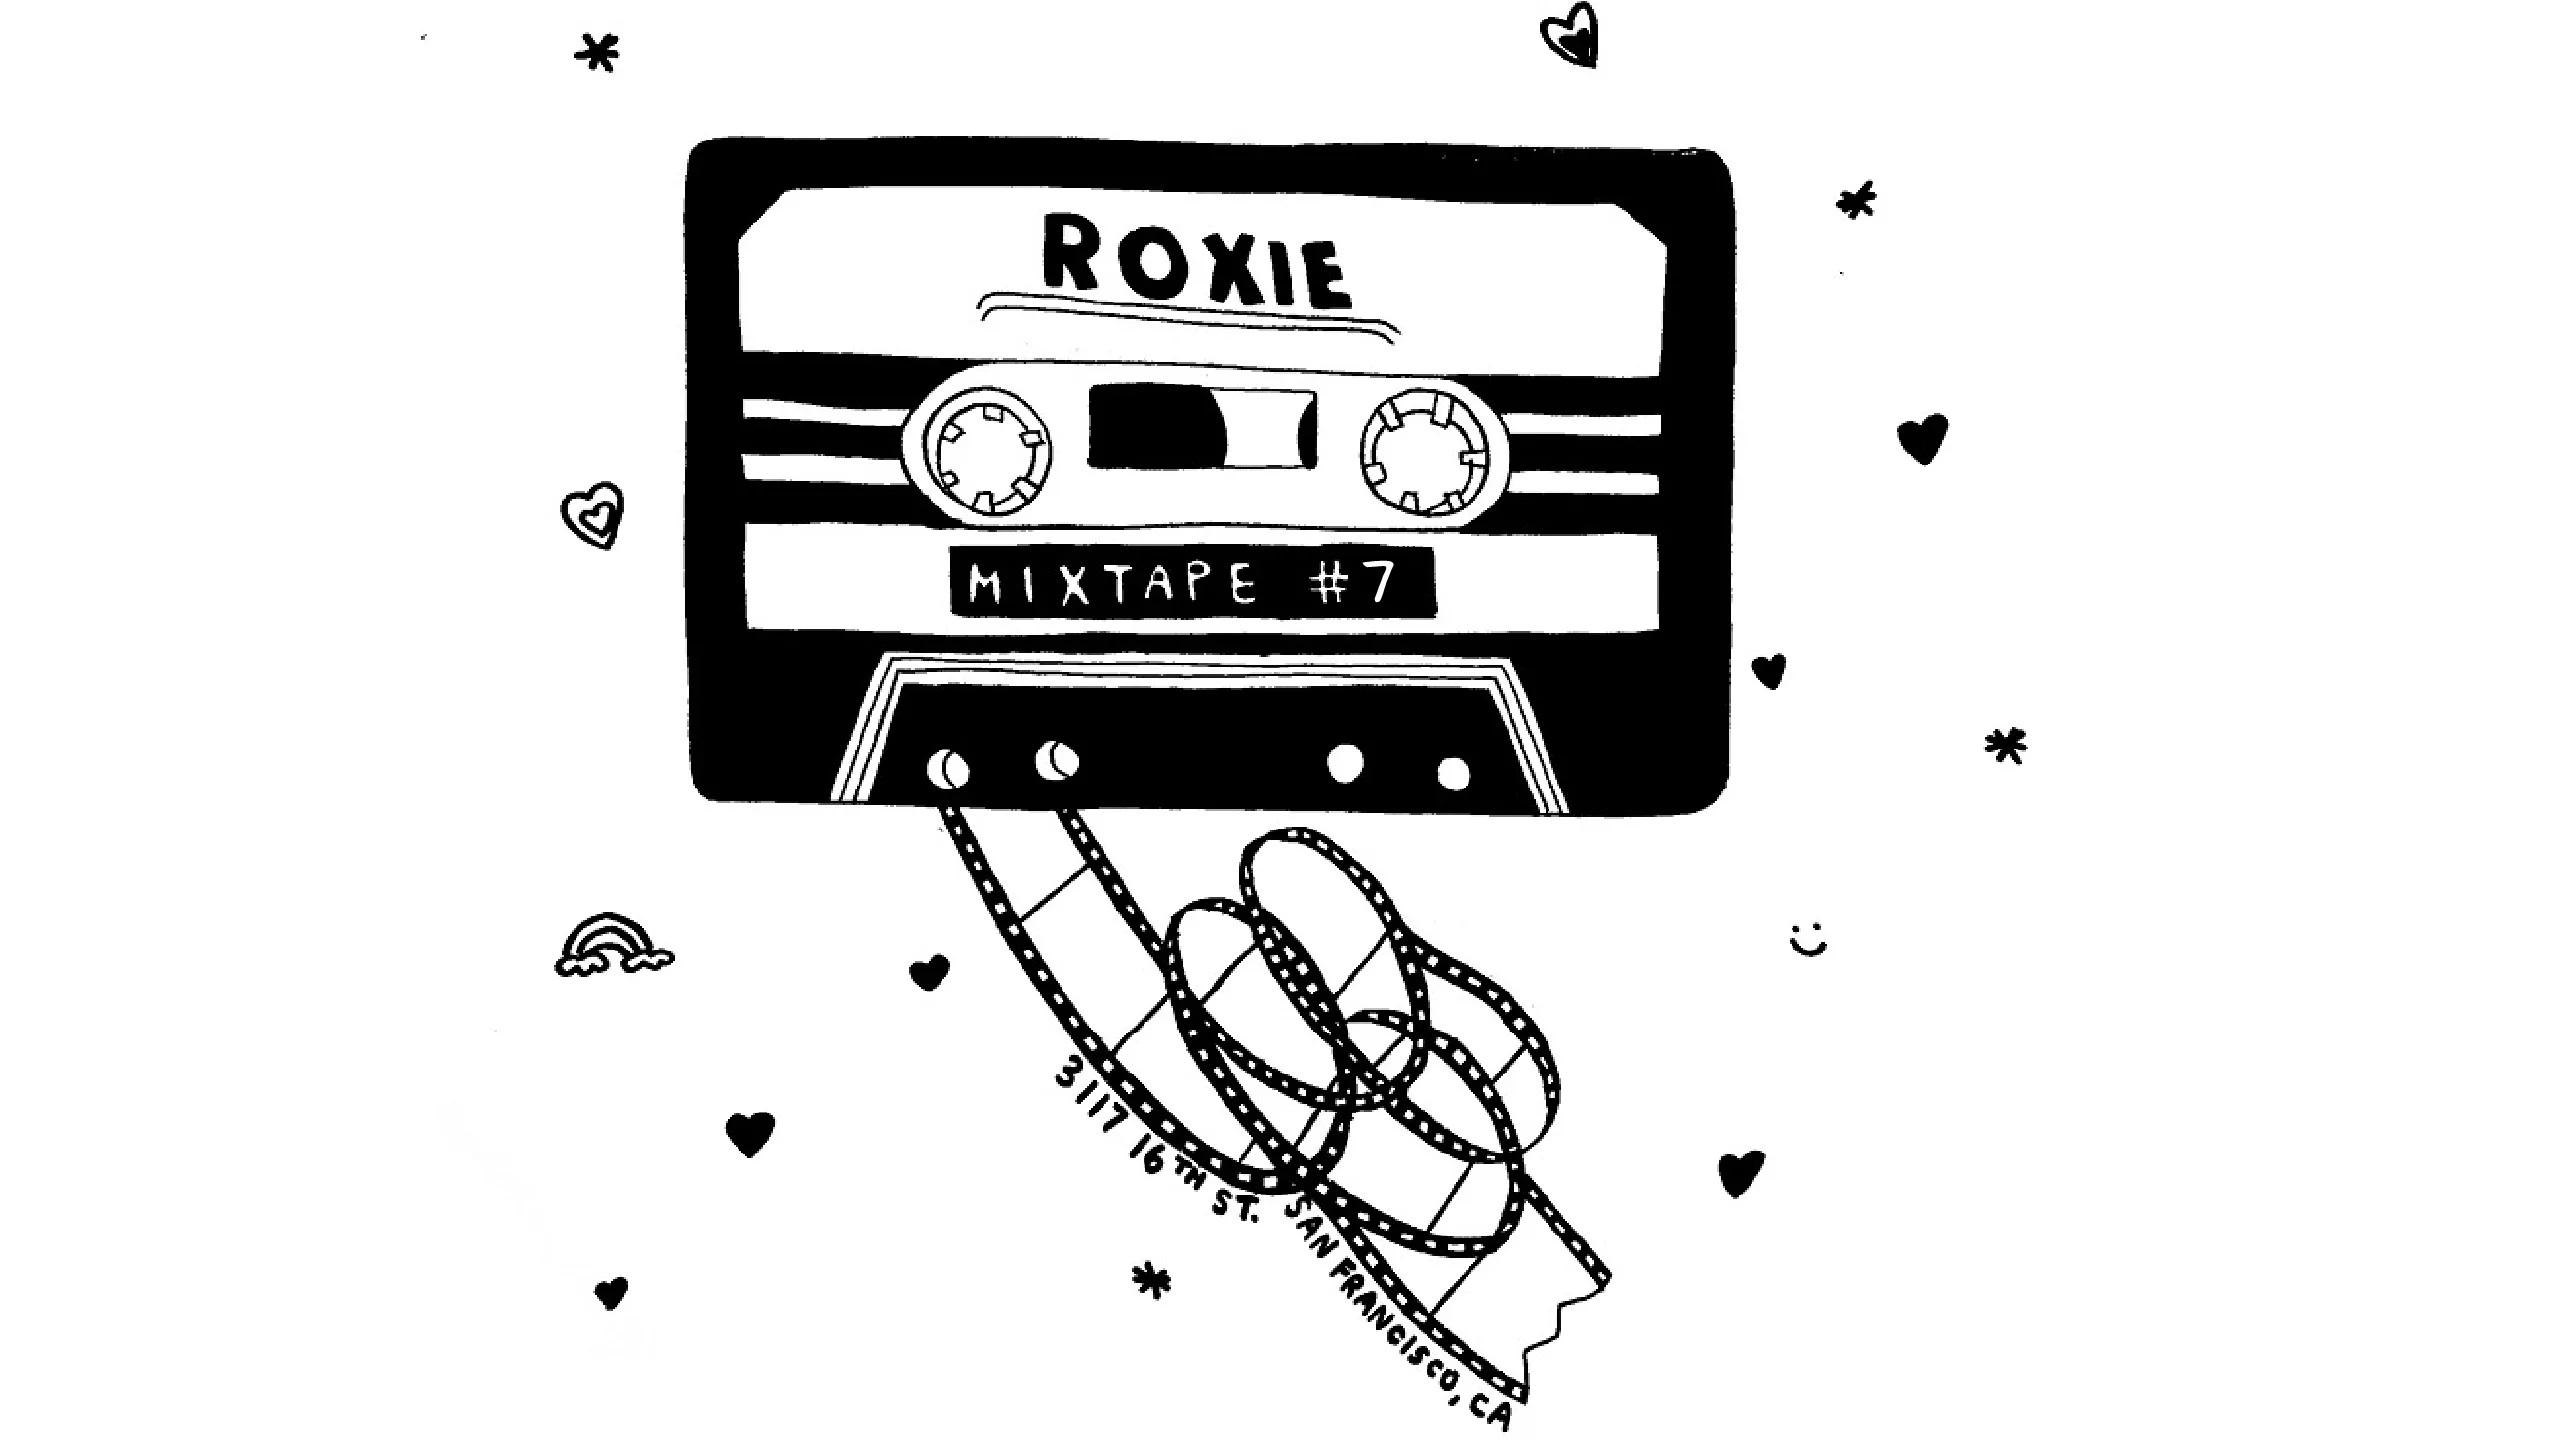 Black and white art of a cassette tape with "Roxie" on top